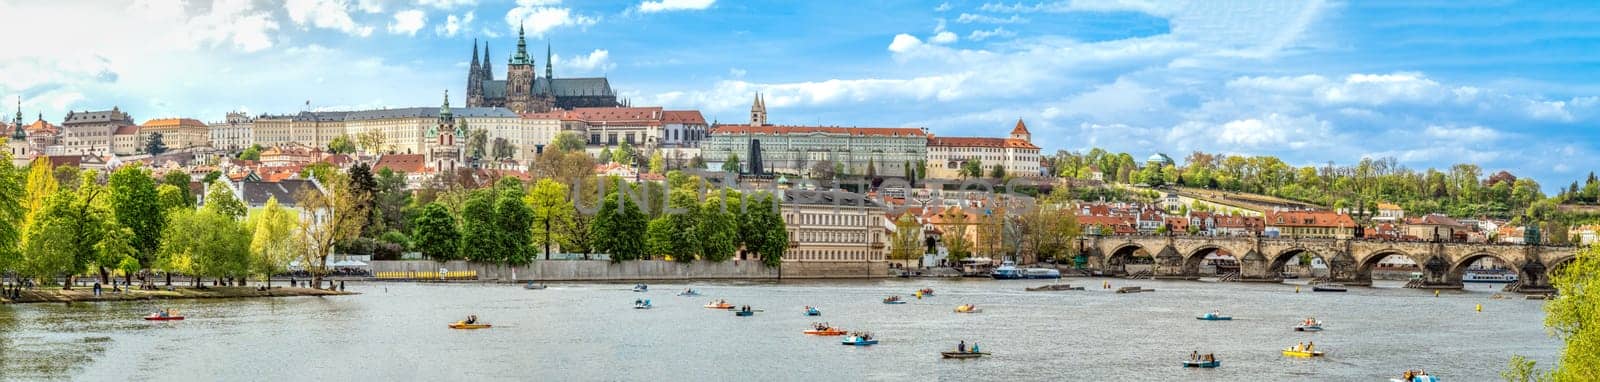 A panoramic view of Prague, the capital of the Czech Republic. View of Prague Castle and Charles Bridge. Summer time, people swim on catamarans. High quality photo